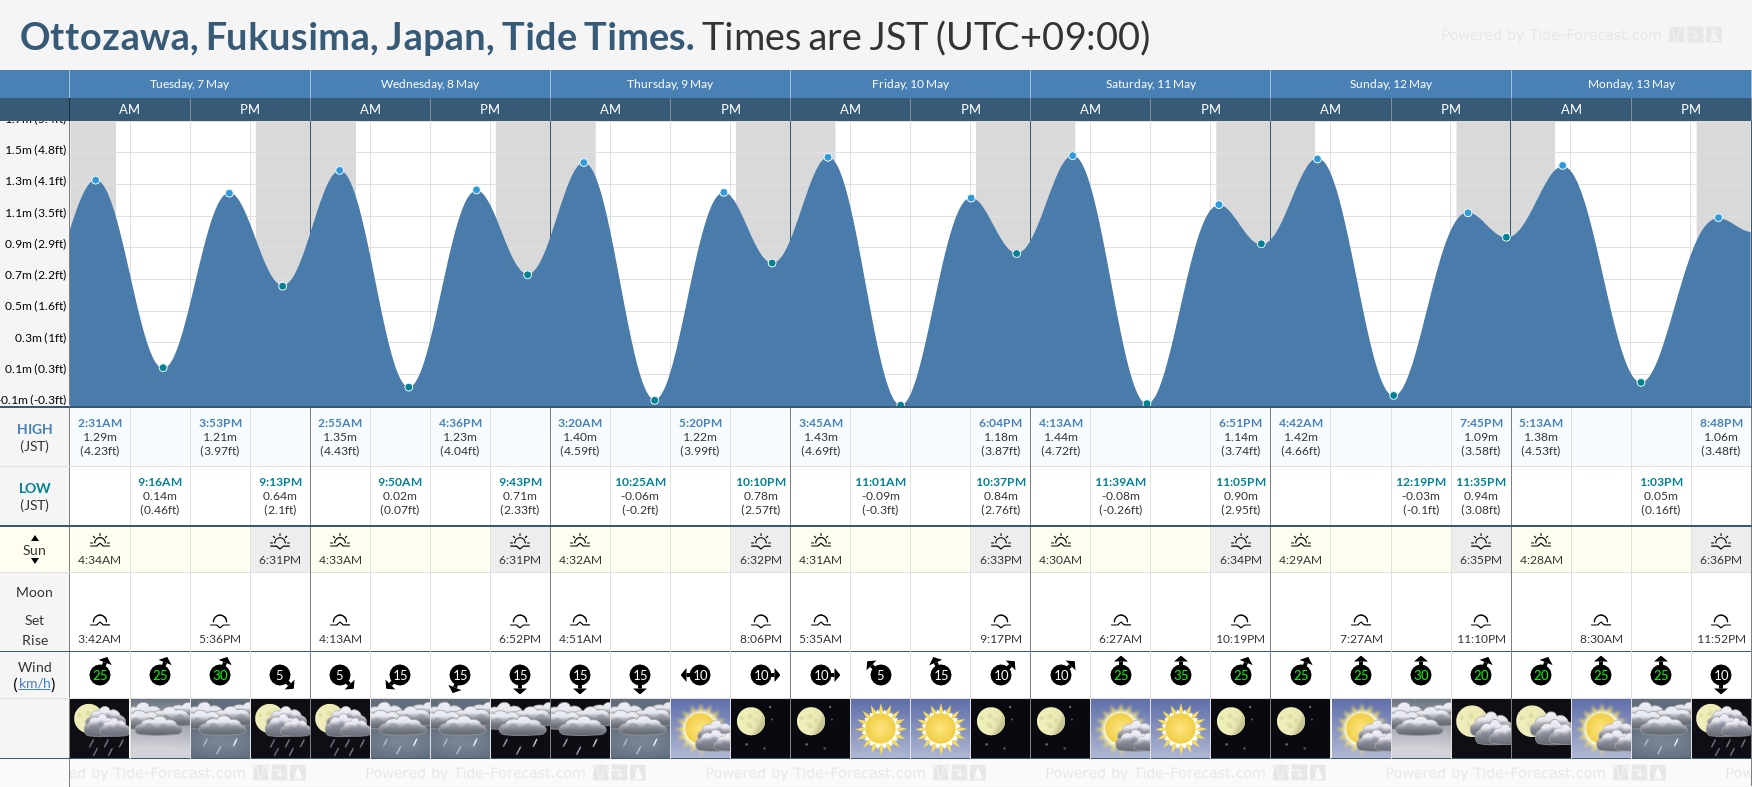 Ottozawa, Fukusima, Japan Tide Chart including high and low tide tide times for the next 7 days